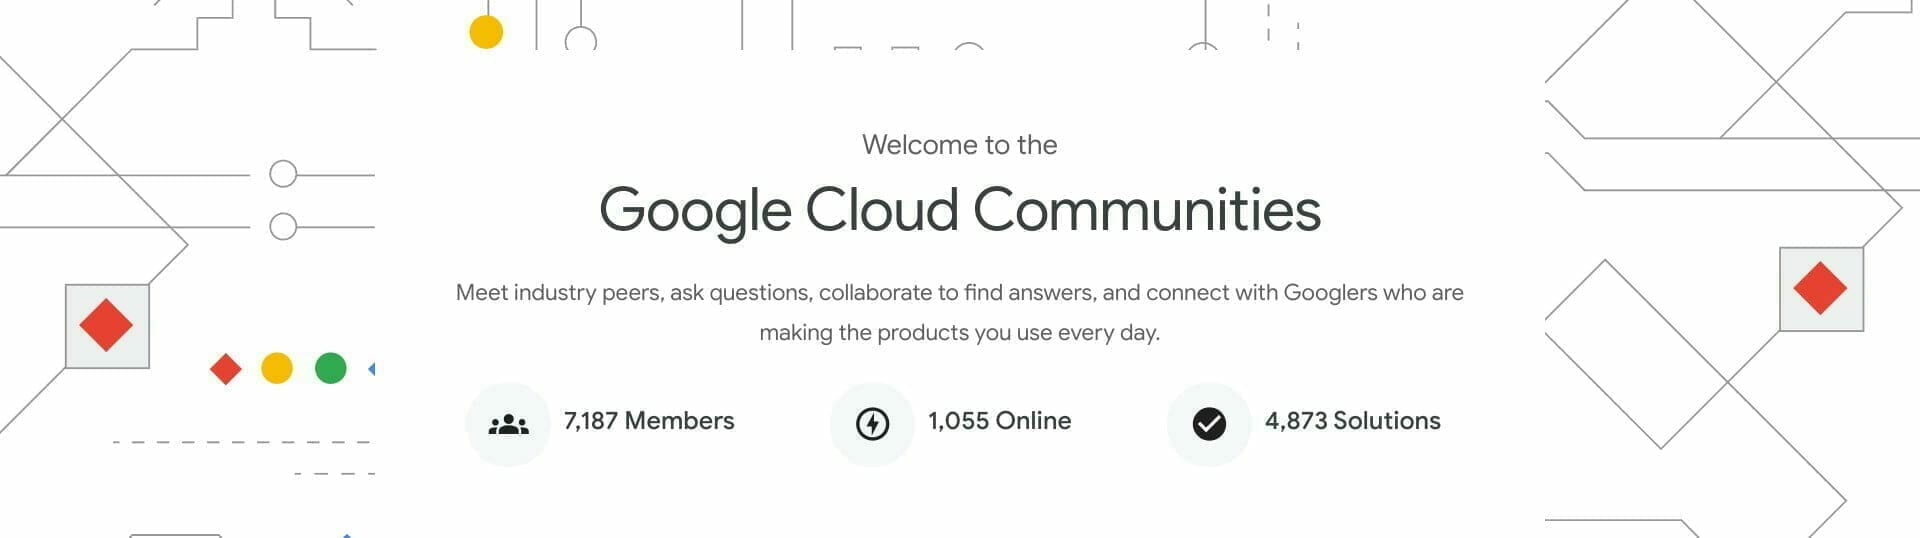 Welcome to the Google Cloud Communities